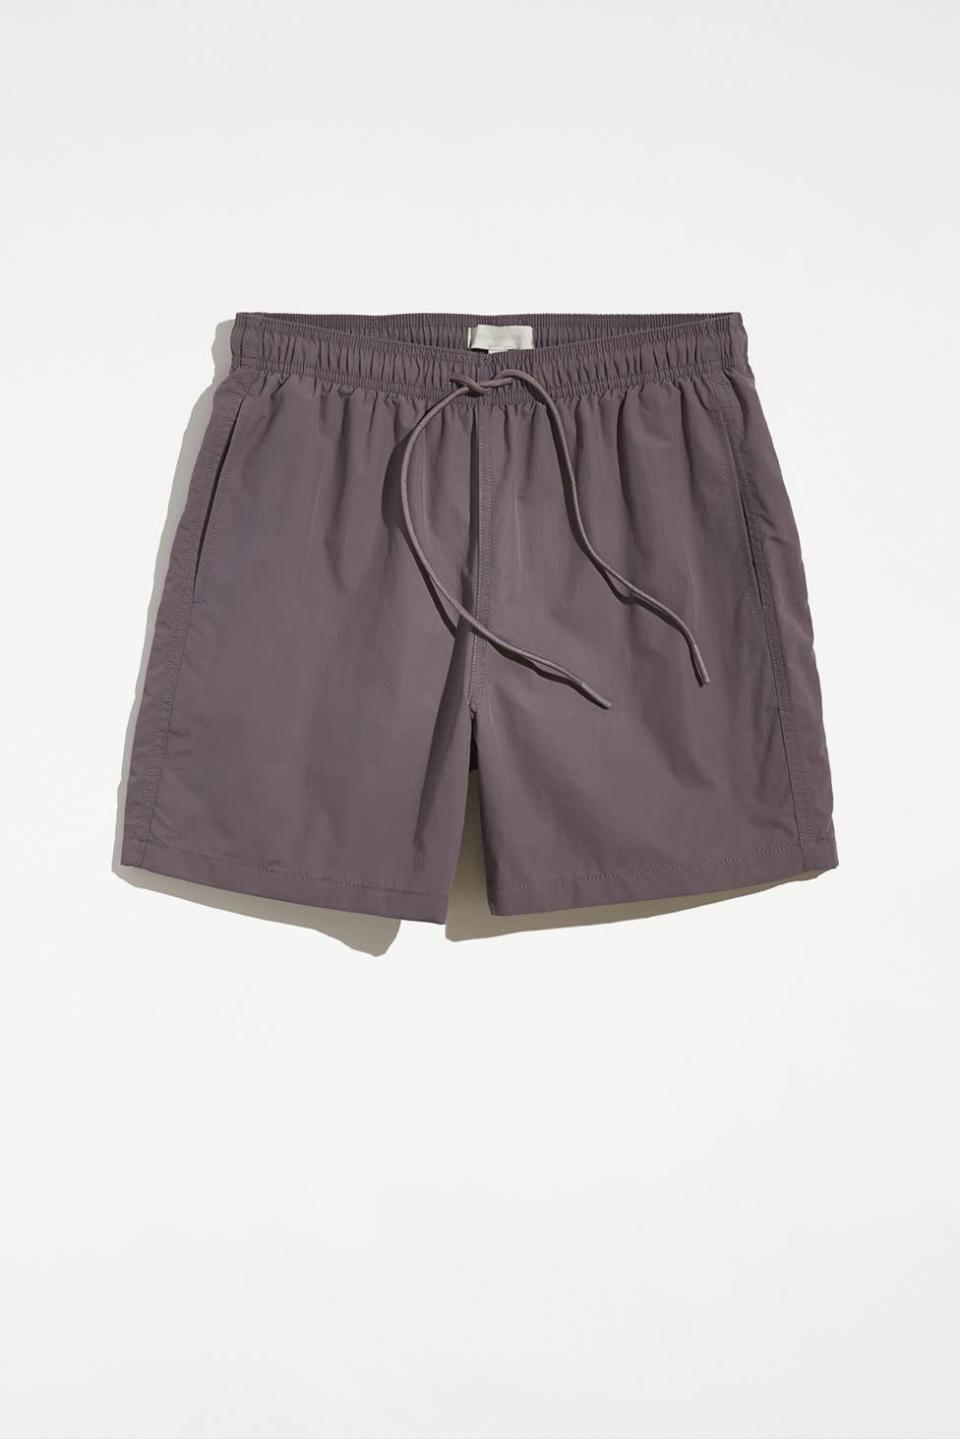 <p><strong>Standard Cloth</strong></p><p>urbanoutfitters.com</p><p><strong>$35.00</strong></p><p><a href="https://go.redirectingat.com?id=74968X1596630&url=https%3A%2F%2Fwww.urbanoutfitters.com%2Fshop%2Fstandard-cloth-oliver-5-nylon-short&sref=https%3A%2F%2Fwww.esquire.com%2Fstyle%2Fmens-fashion%2Fg3307%2Fbest-shorts-spring-summer%2F" rel="nofollow noopener" target="_blank" data-ylk="slk:Shop Now" class="link ">Shop Now</a></p><p>If the shorts you're reaching for this summer are slightly more cropped than the ones you've worn in the past, they're probably perfect. </p>